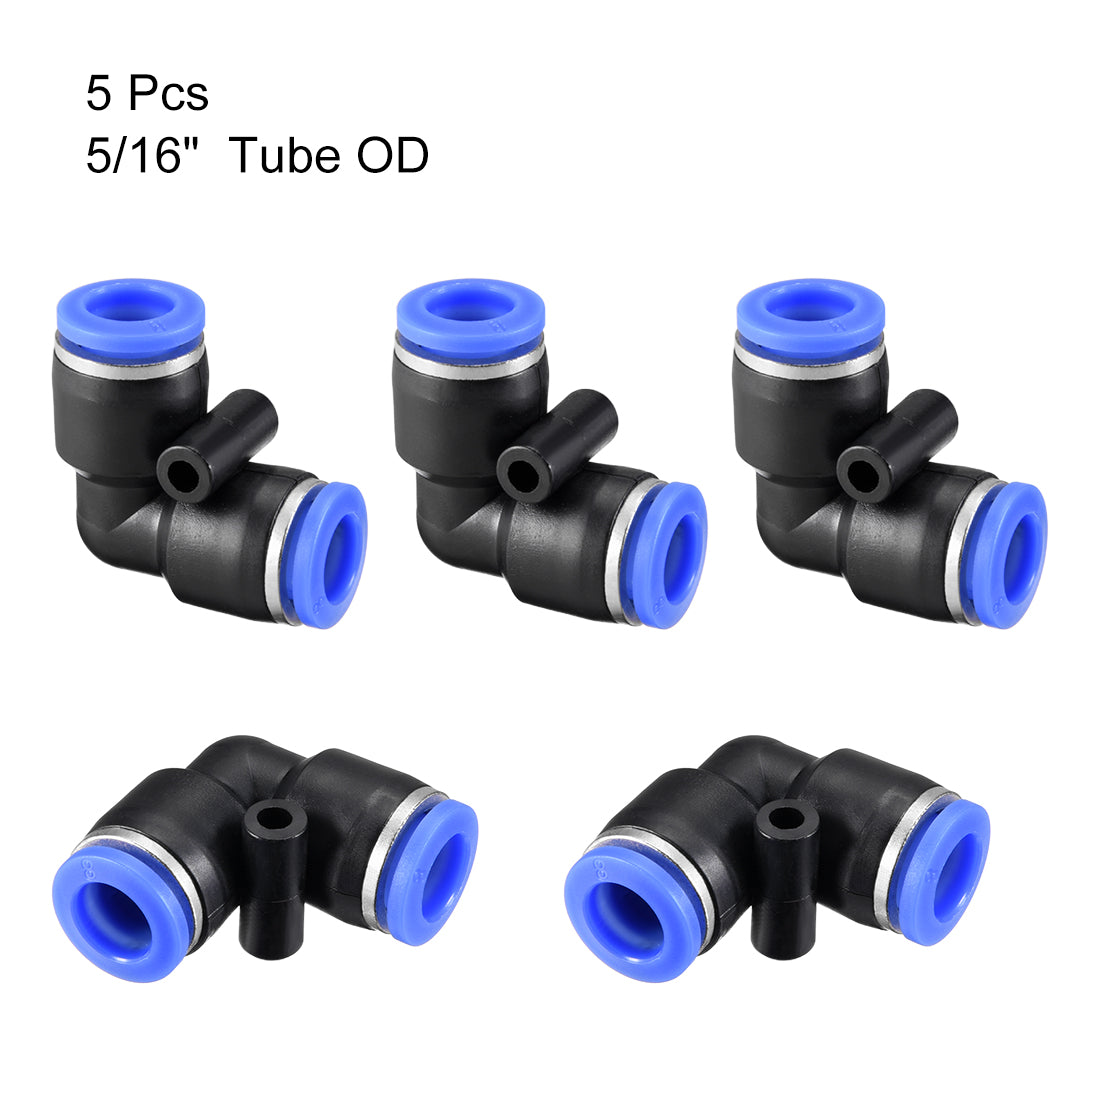 Uxcell Uxcell Plastic Elbow Push to Connect Tube Fitting 14mm Tube OD Blue 5pcs